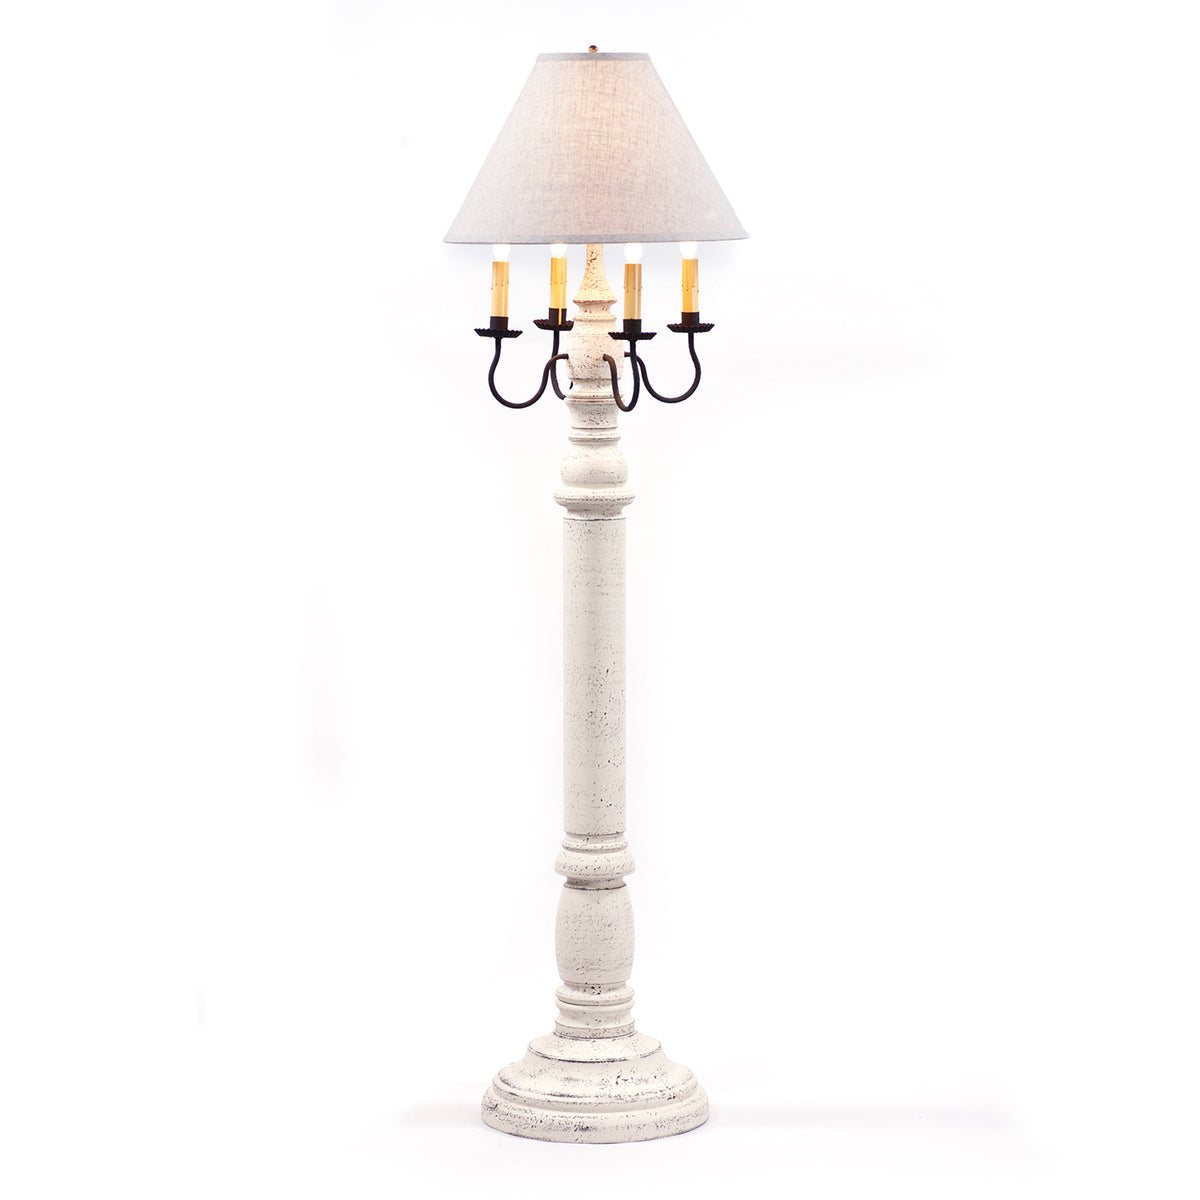 General James Floor Lamp in White with Linen Ivory Shade